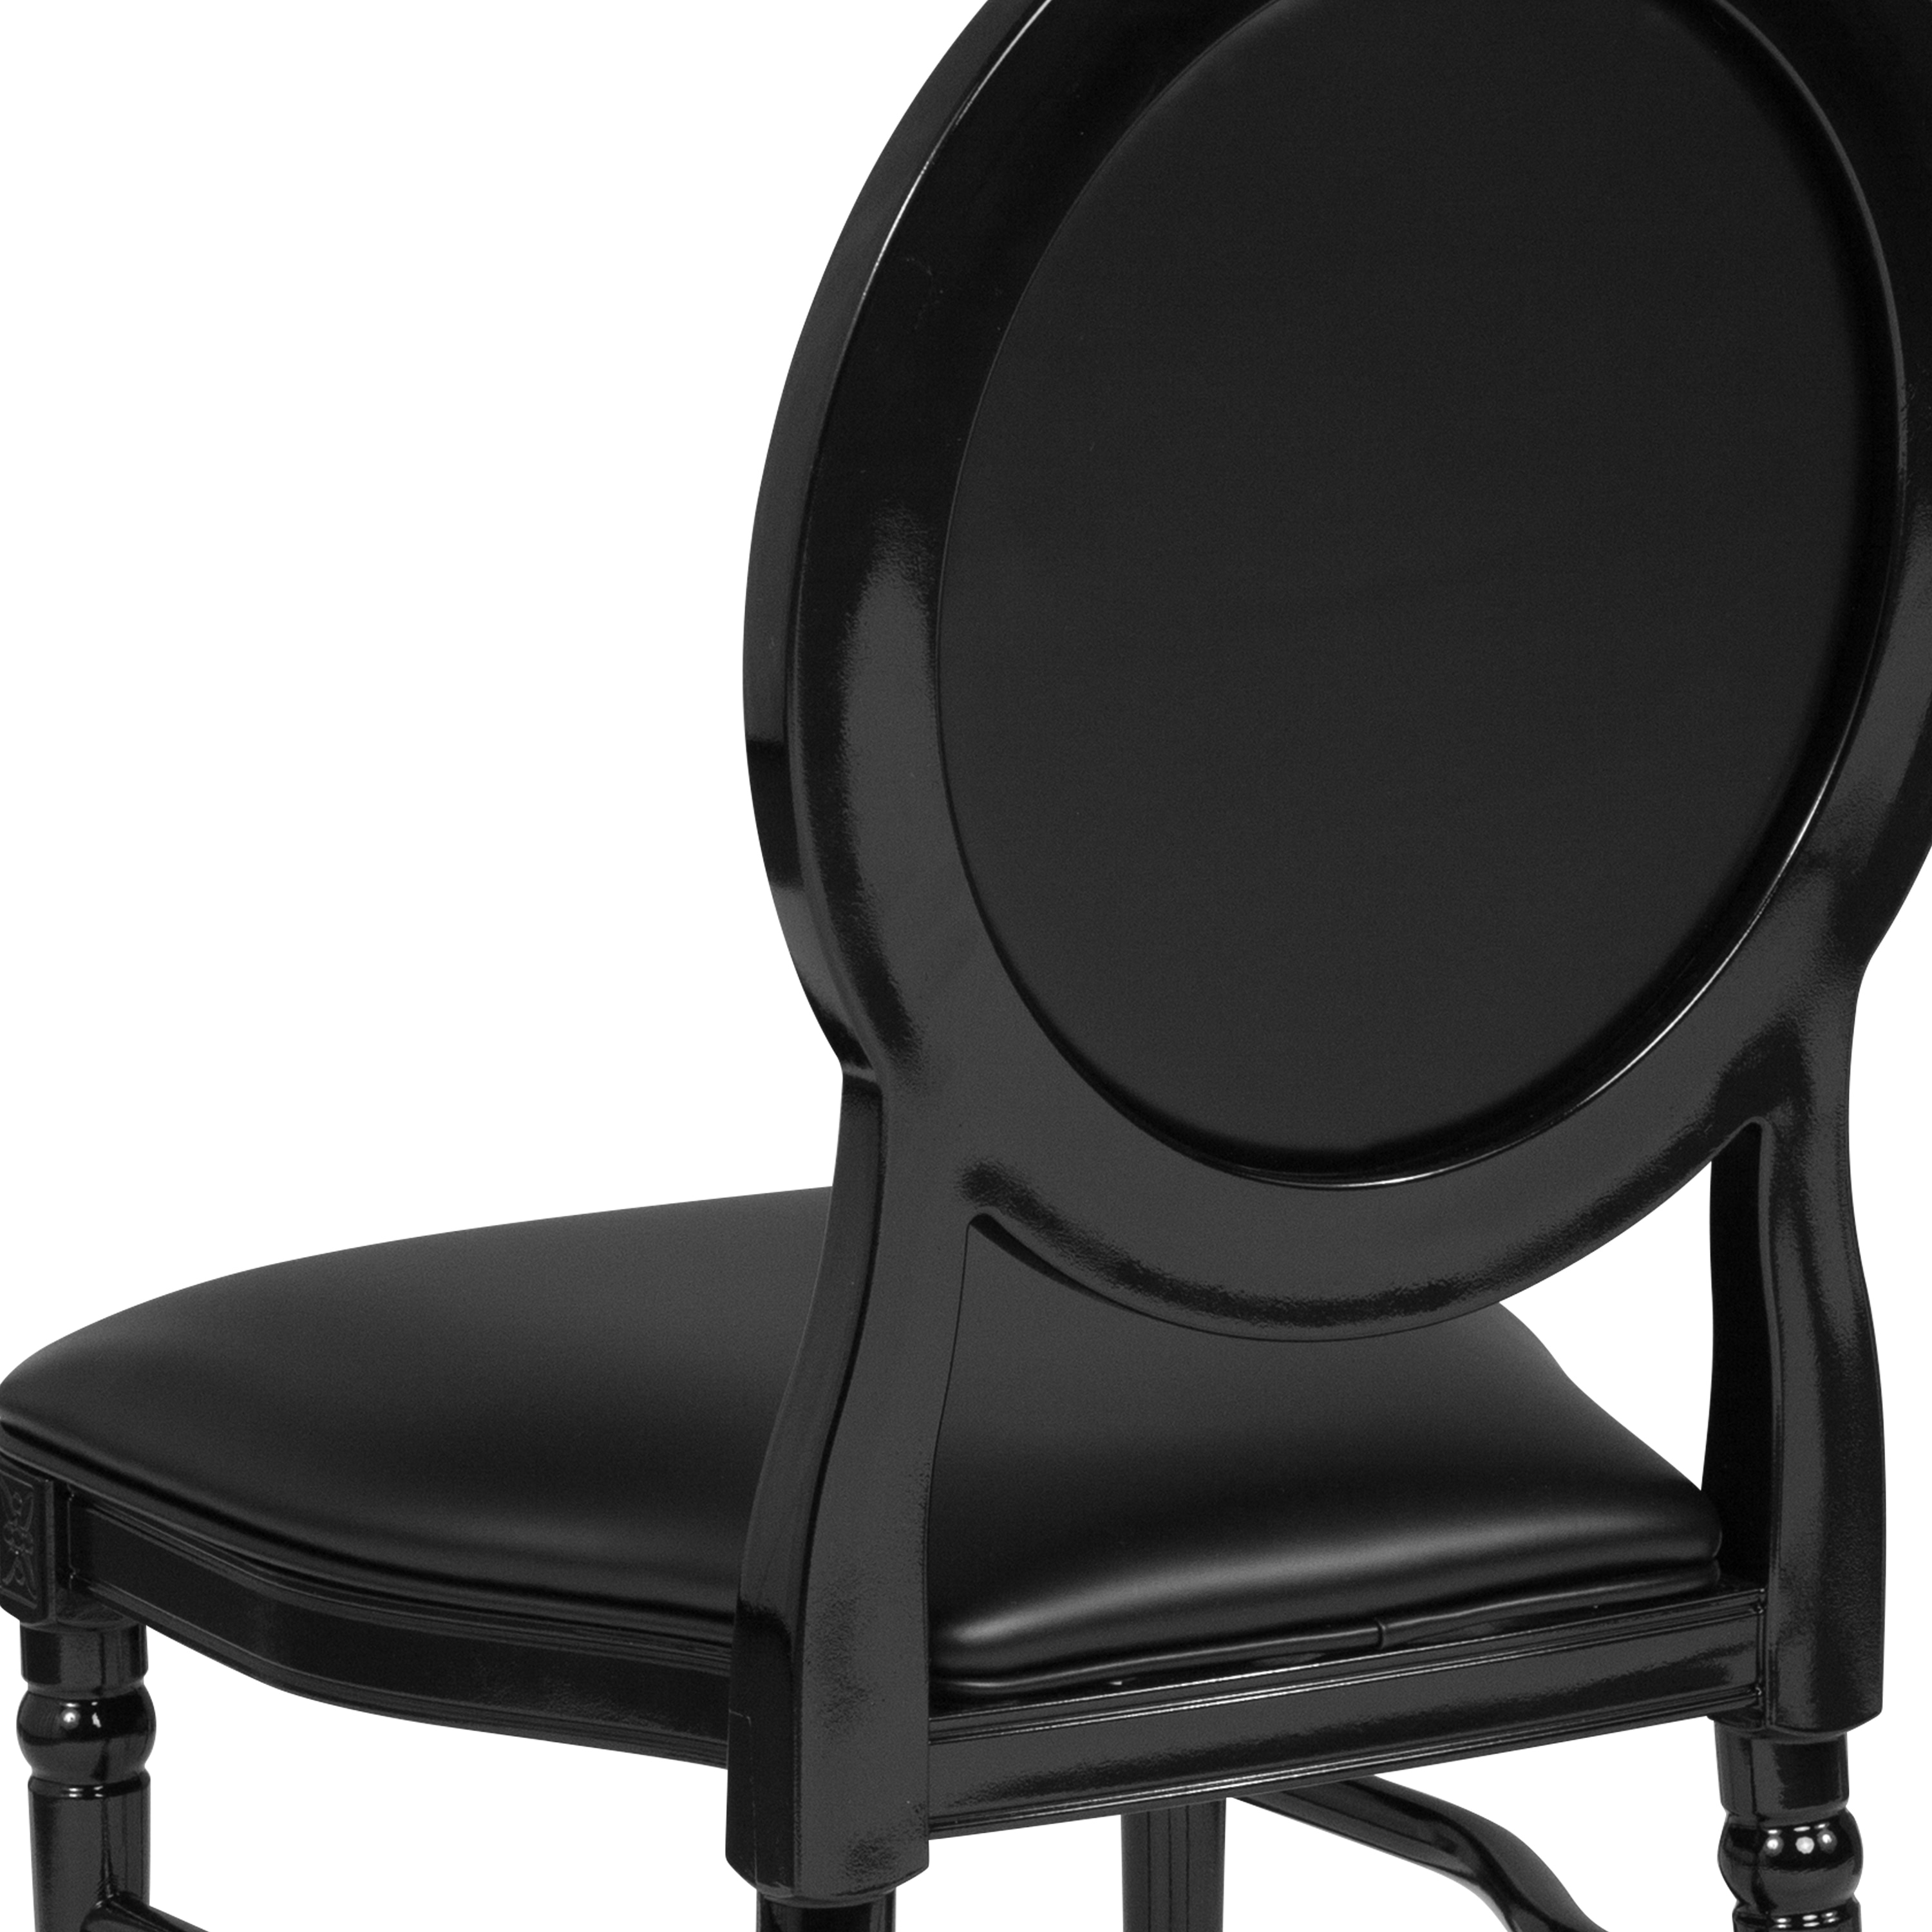 TYCOON Series 900 lb. Capacity King Louis Chair with Transparent Back,  Black Vinyl Seat and Black